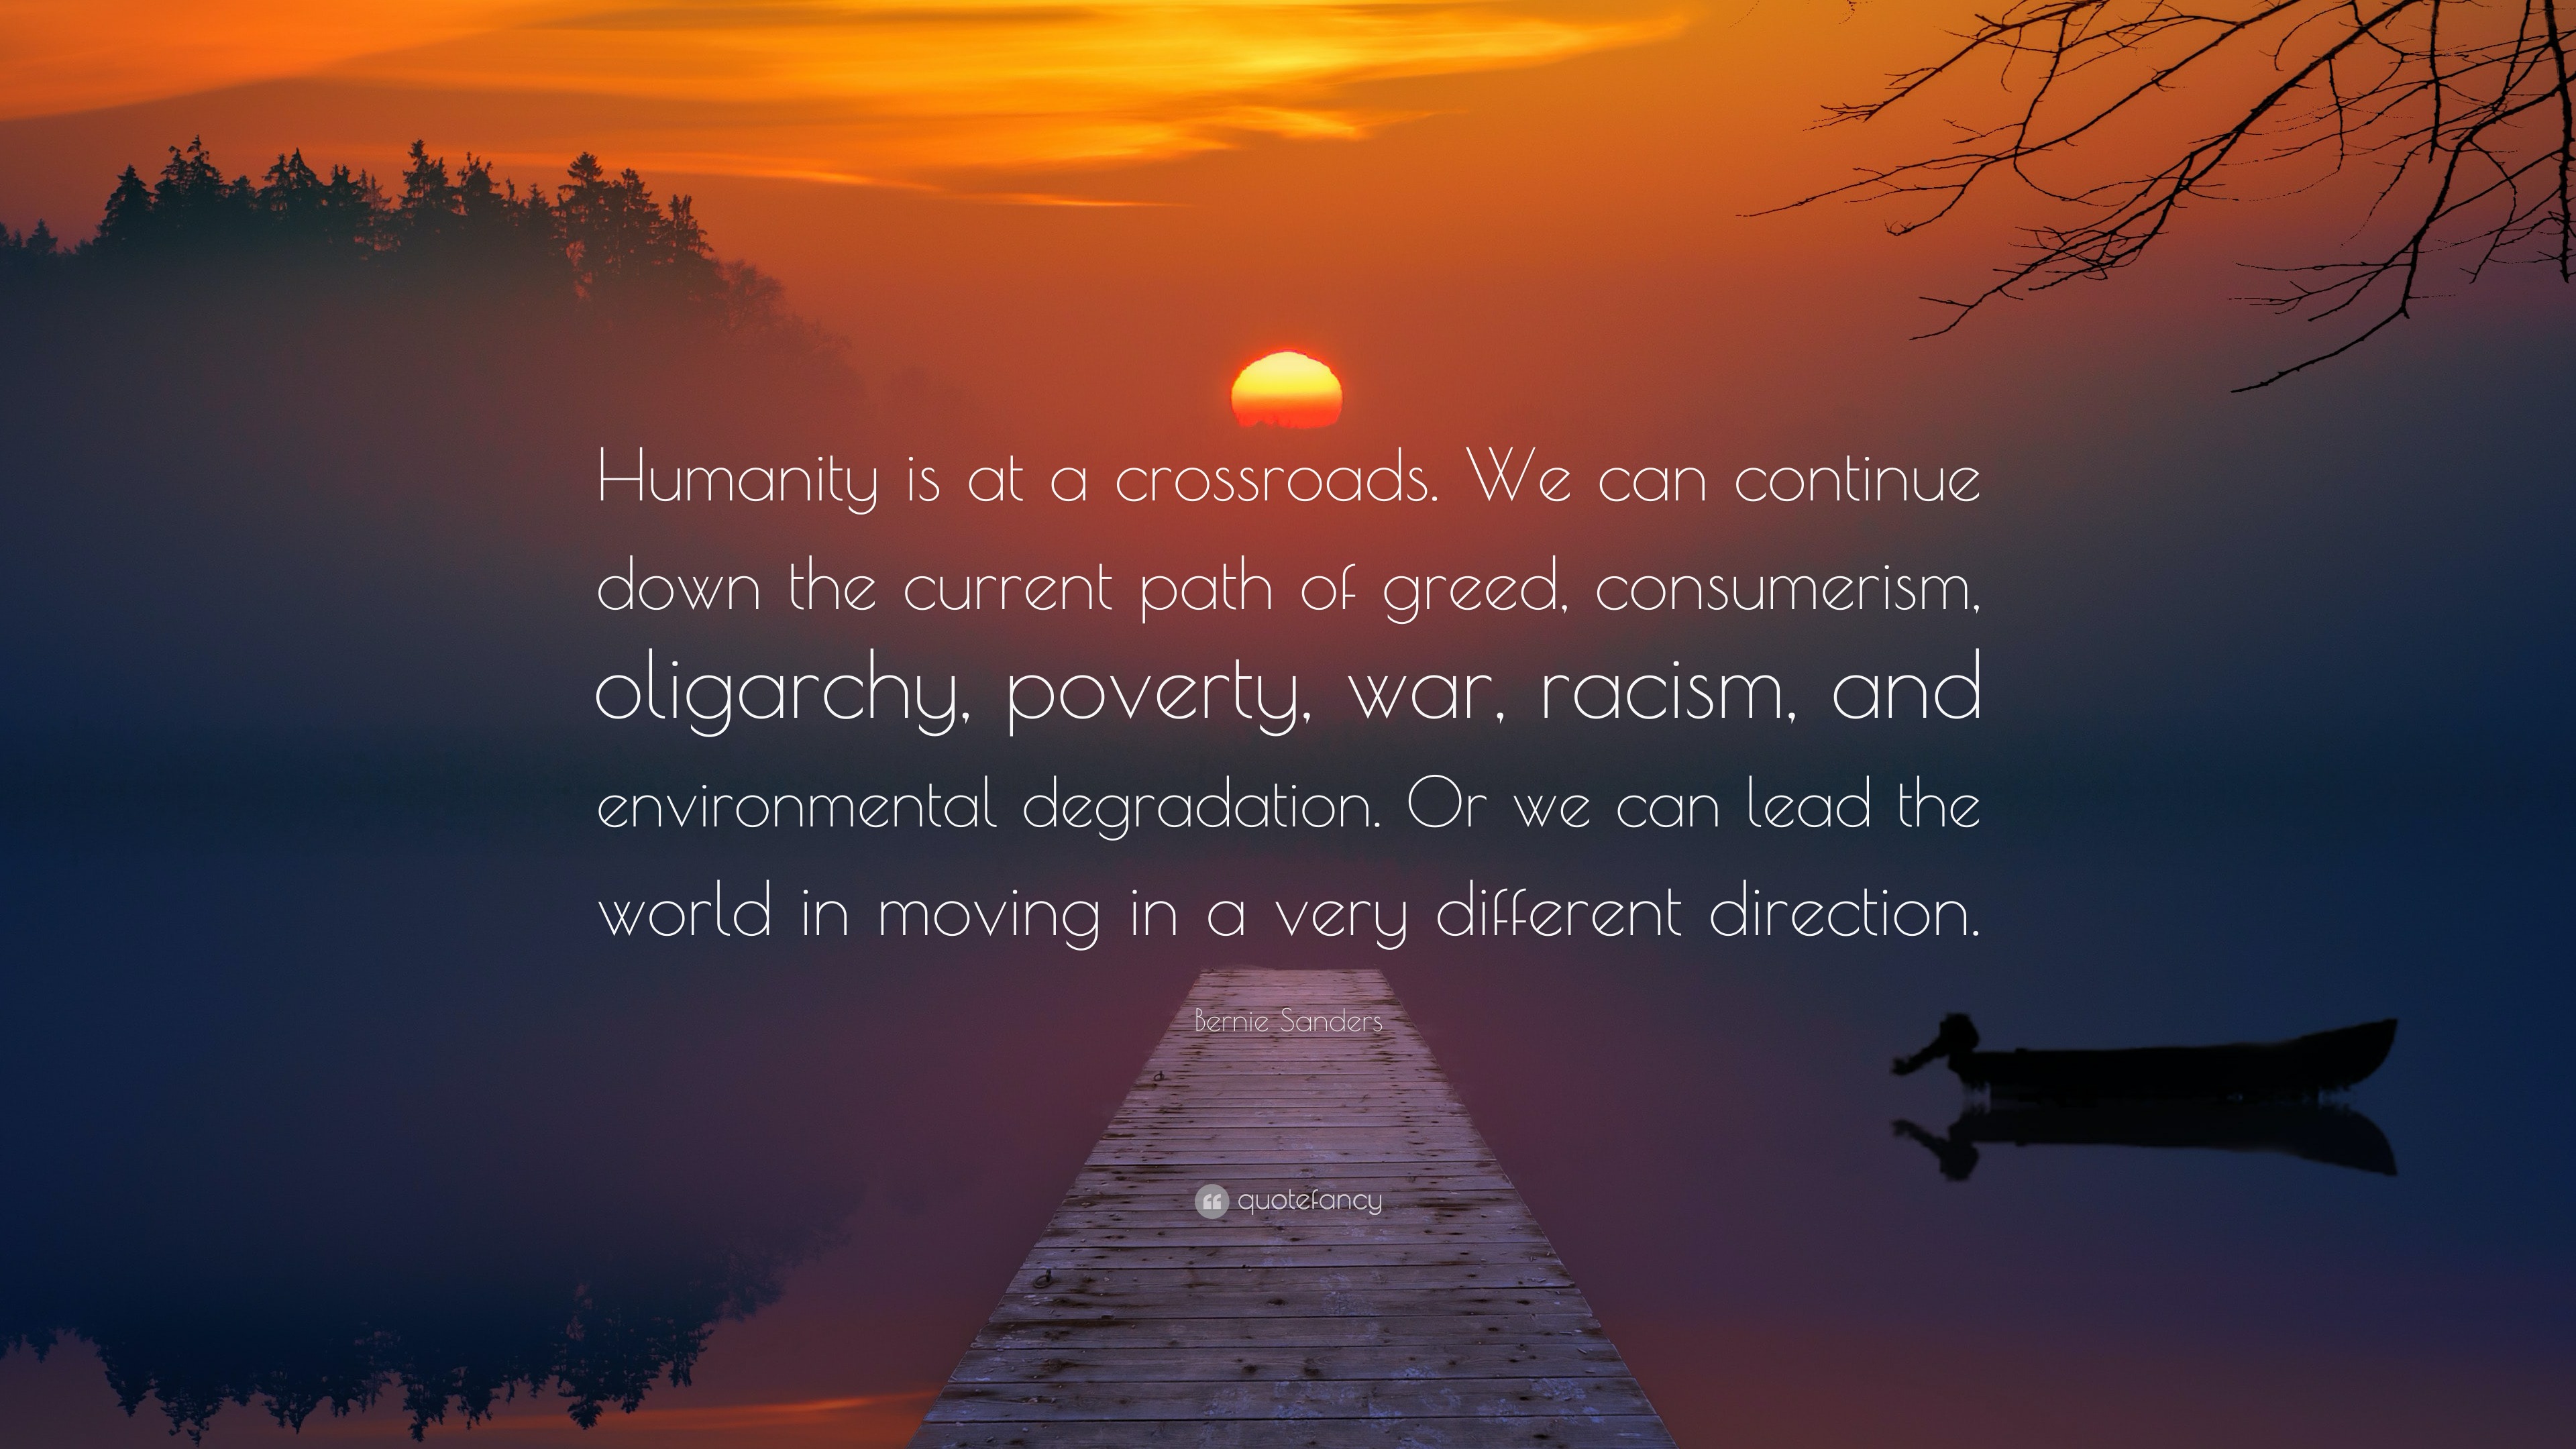 Bernie Sanders Quote: “Humanity is at a crossroads. We can